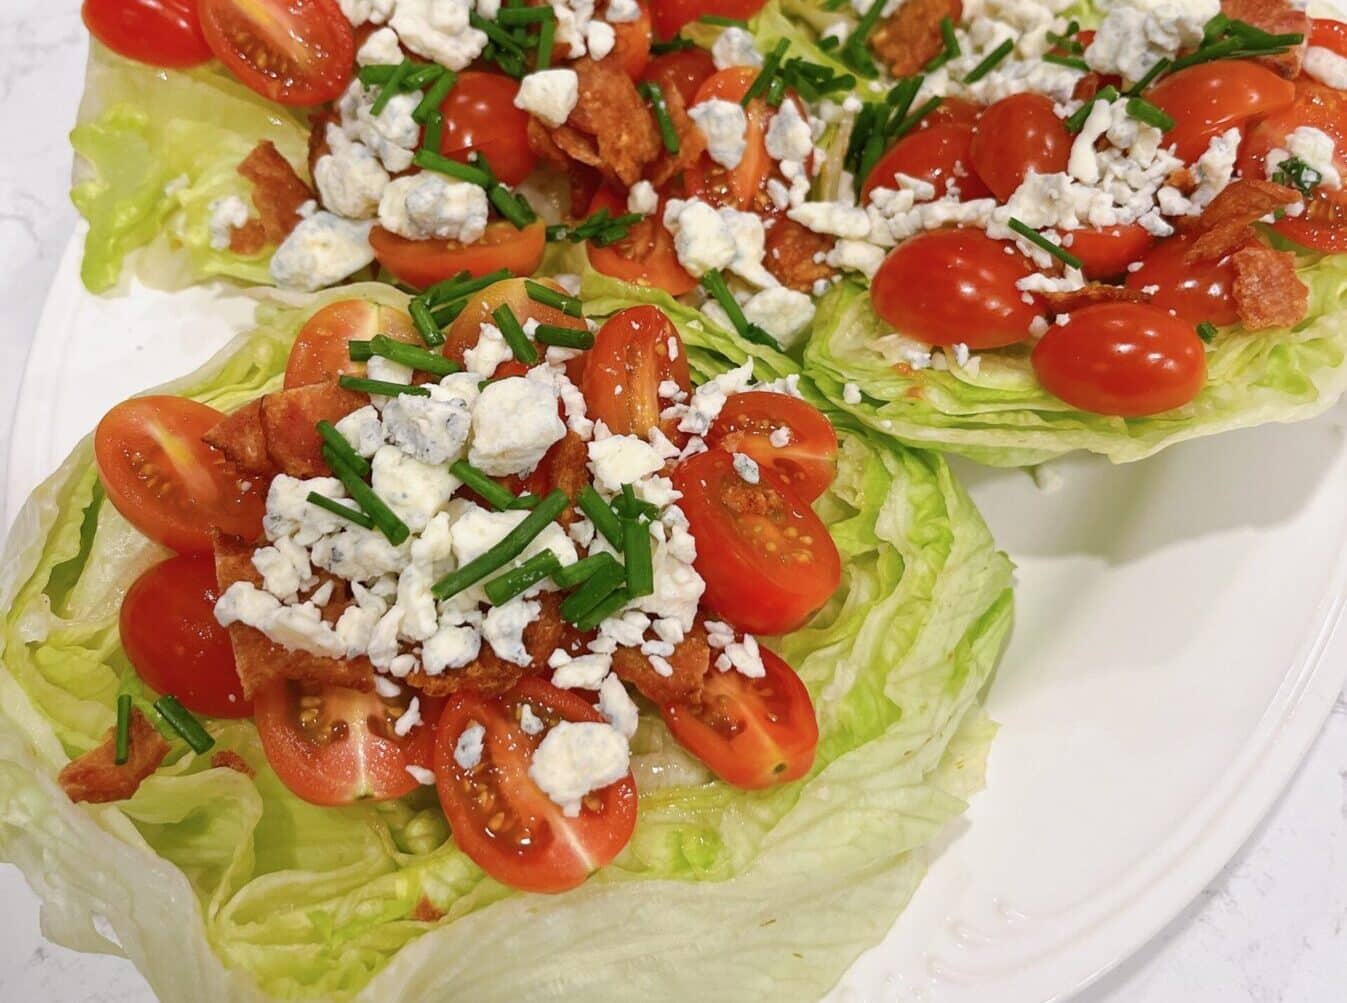 Steakhouse Wedge Salad with a Twist